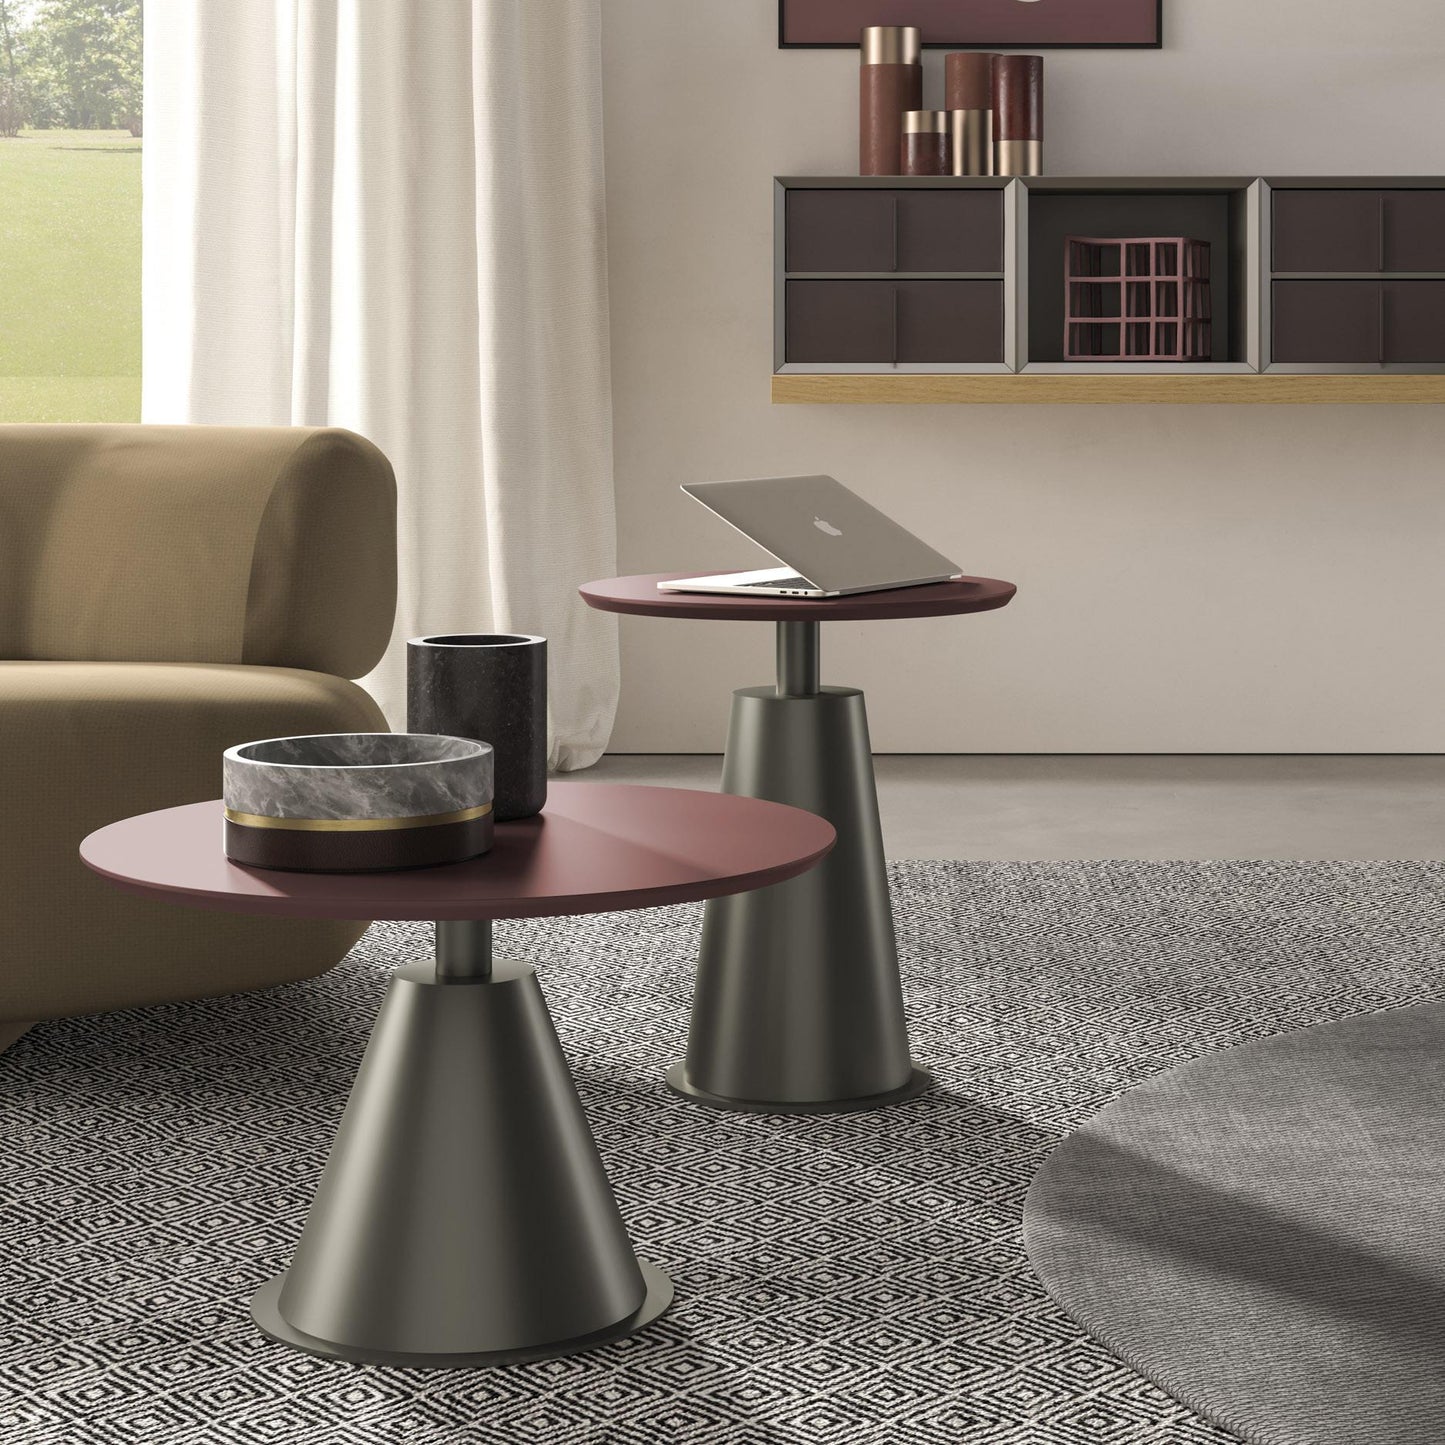 Mulberry 01-23 Coffee Table by Orme Design